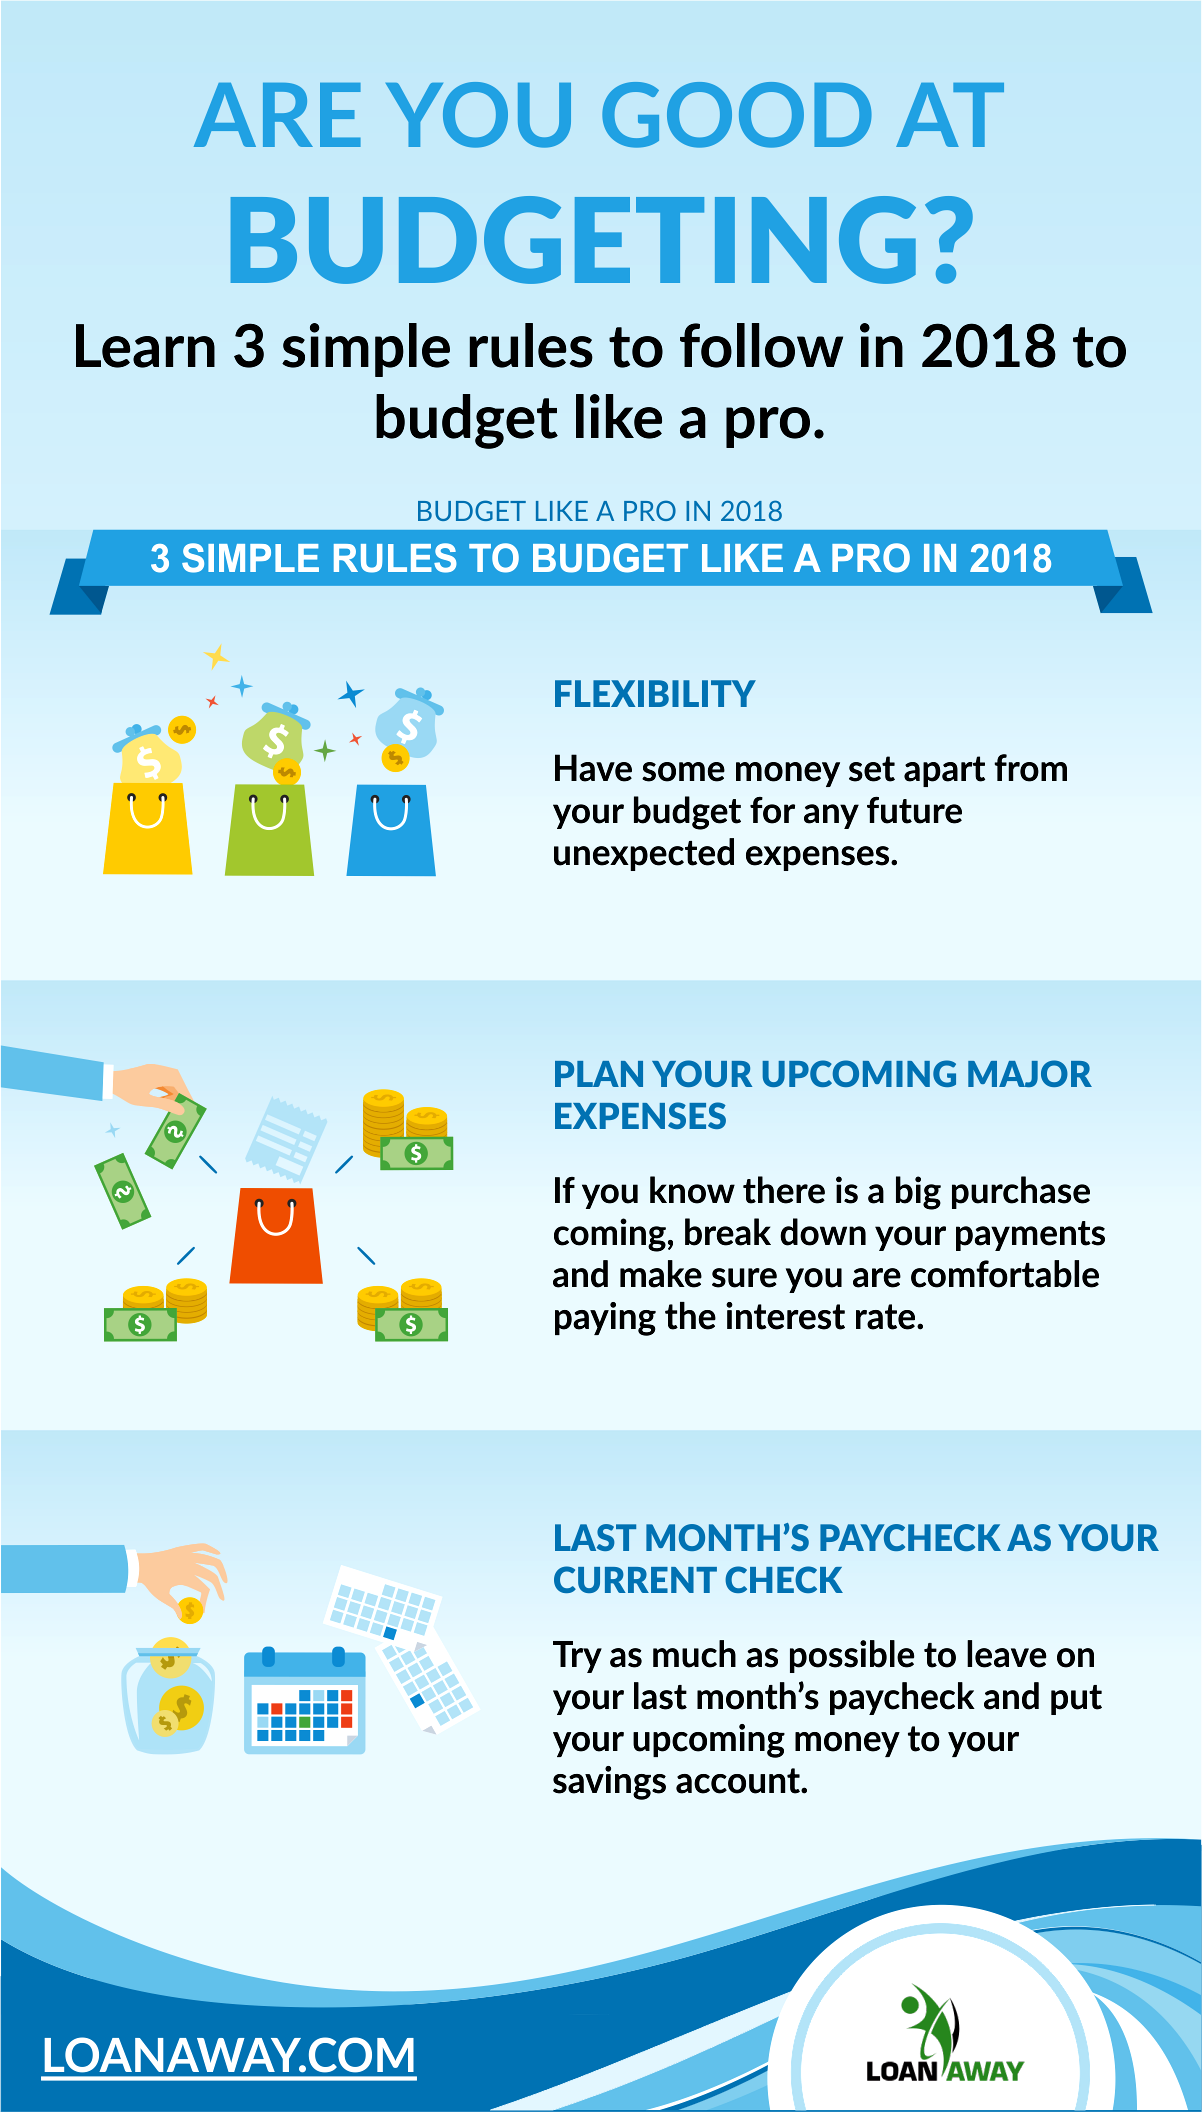 3 Simple Rules To Budget Like a Pro in 2018